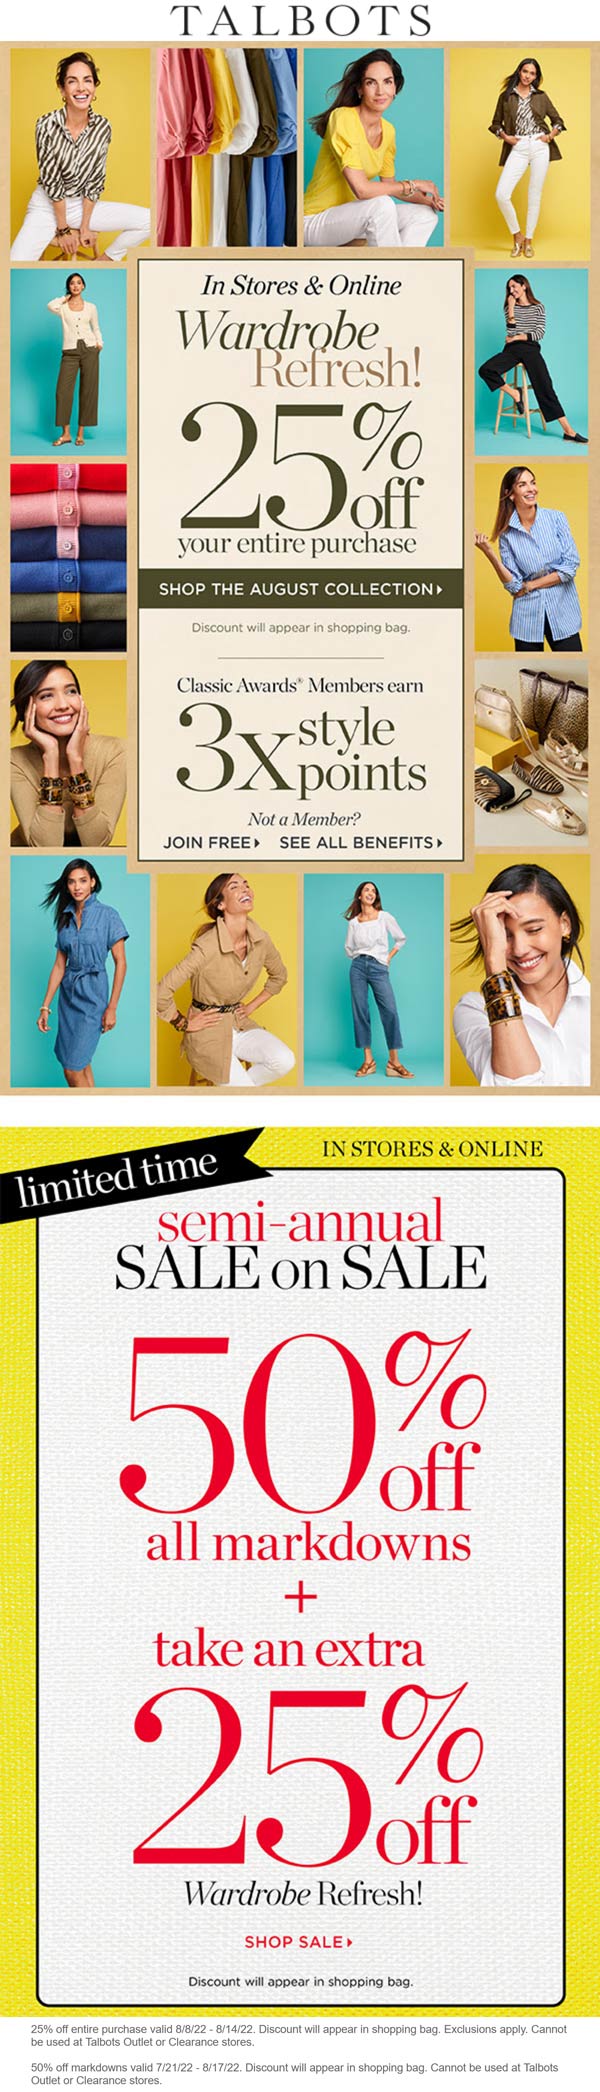 Talbots stores Coupon  25% off everything & 50% off sale items at Talbots, ditto online #talbots 